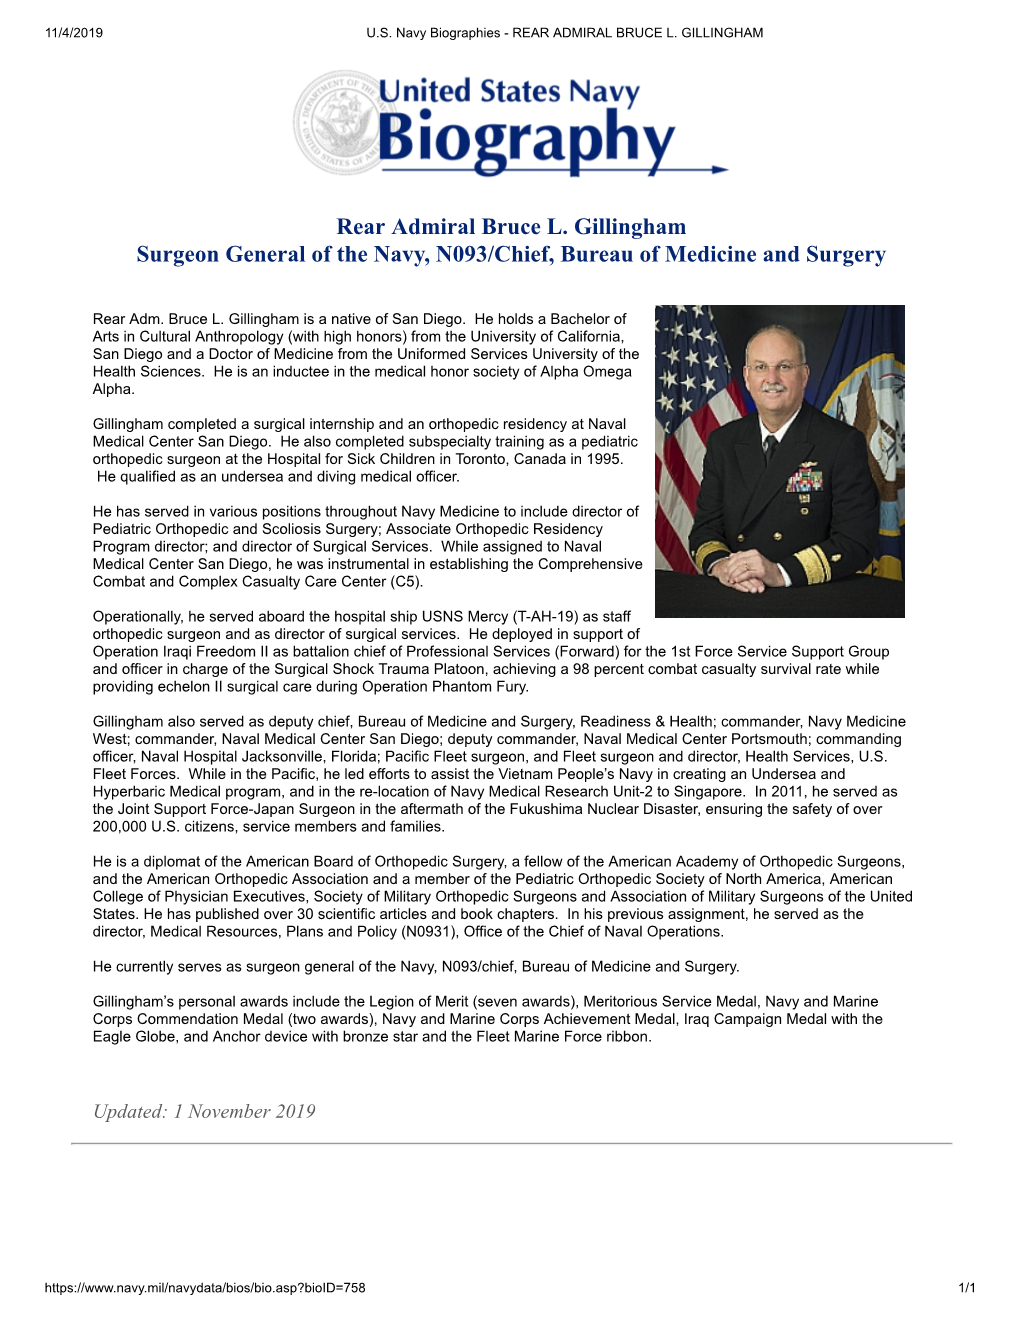 Rear Admiral Bruce L. Gillingham Surgeon General of the Navy, N093/Chief, Bureau of Medicine and Surgery